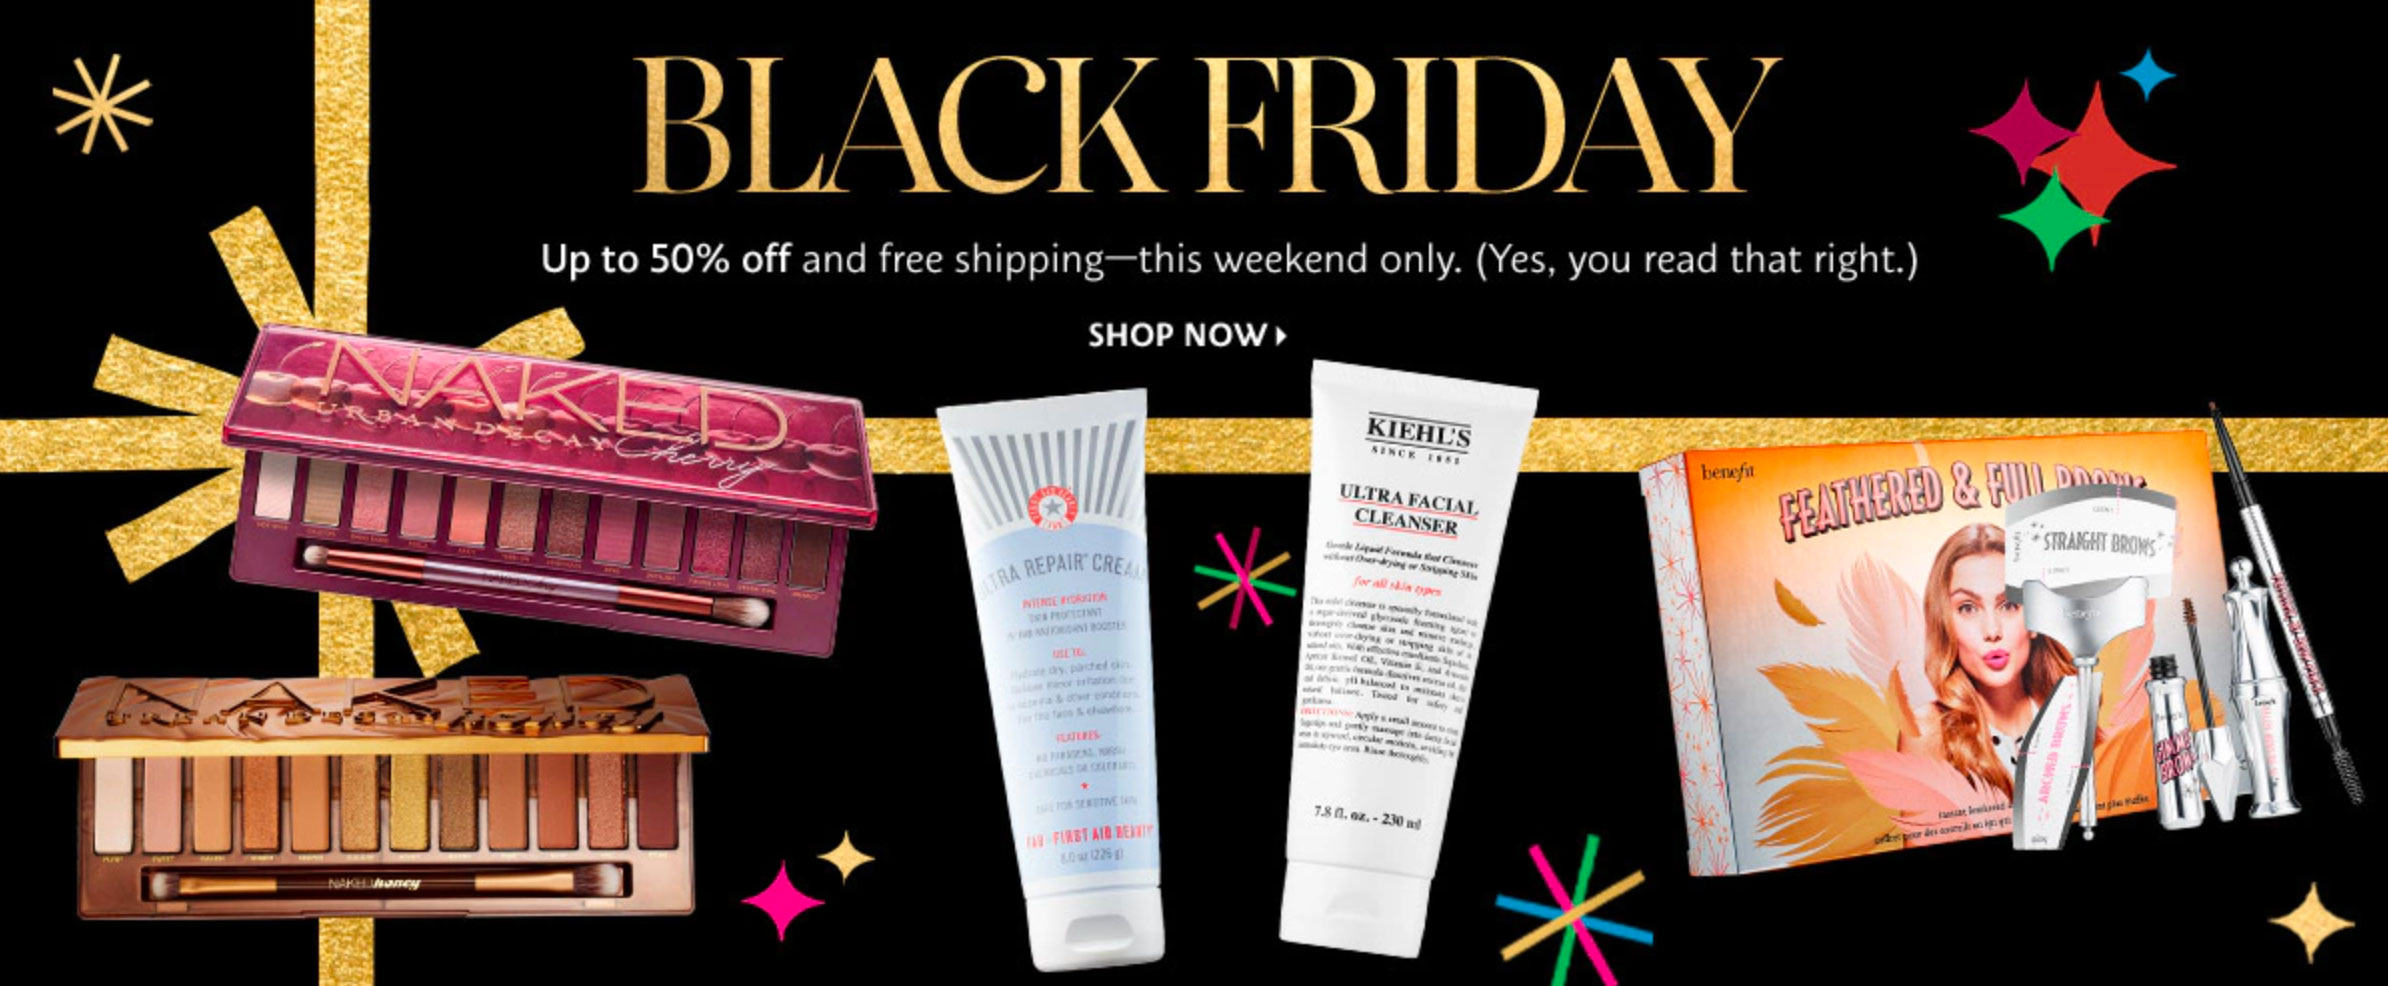 Sephora Black Friday 2021 Ad, Sales, and Deals - Does Sephora Have Black Friday 2022 Deals